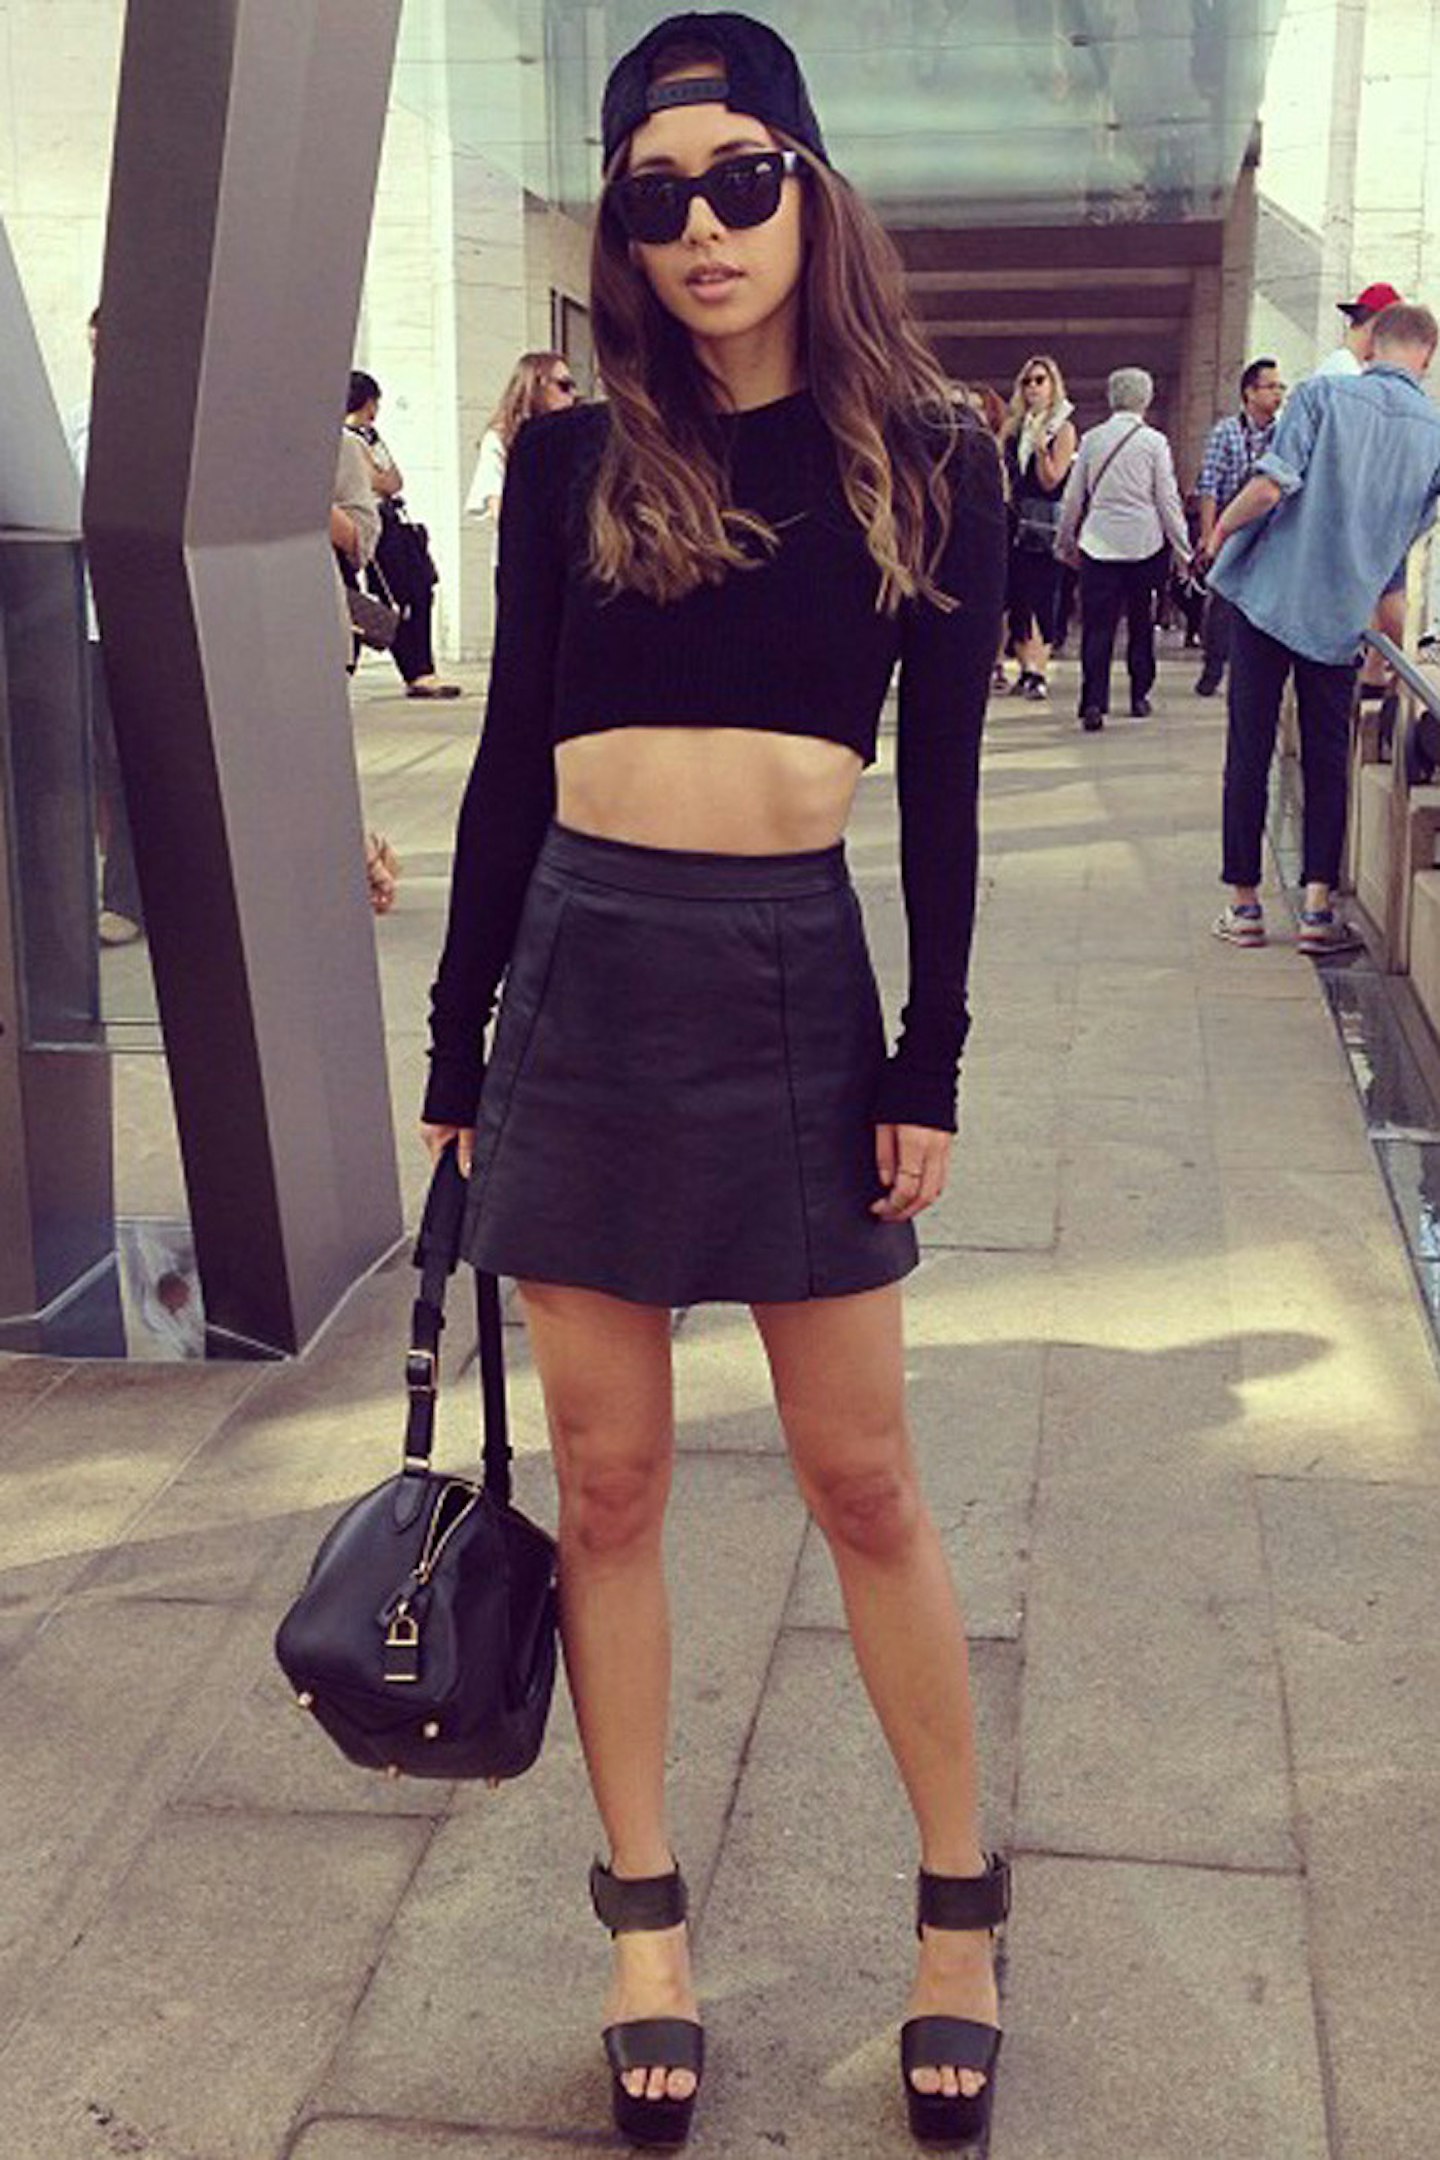 @rumineely: Today at the shows